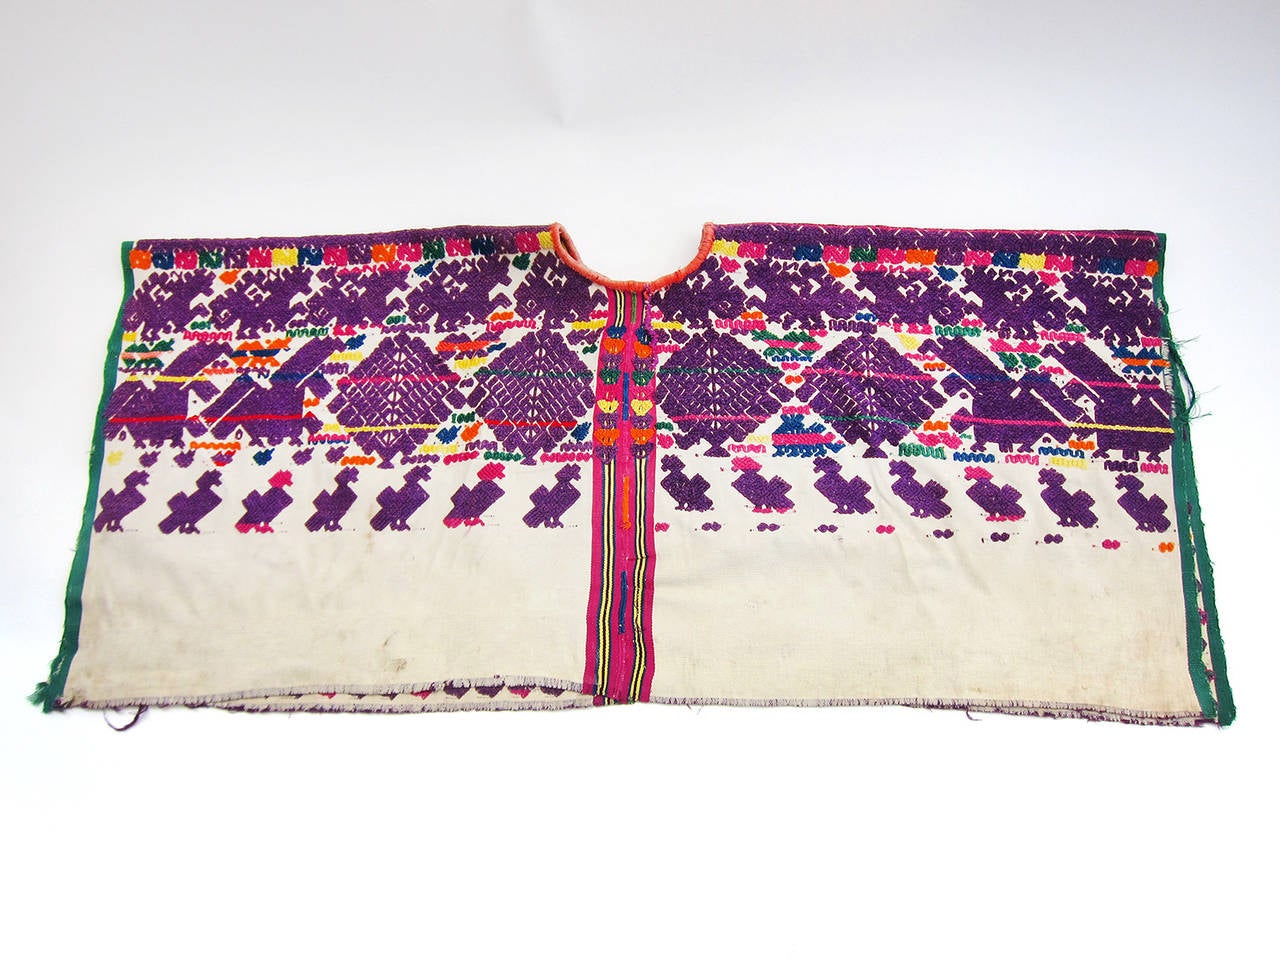 Following a tradition of over 1,000 years, the Maya people of today still employ the backstrap loom to create the traditional garment - the huipil. Woven cotton forms the base for a brilliant show of embroidered Mayan motifs, animal figures and